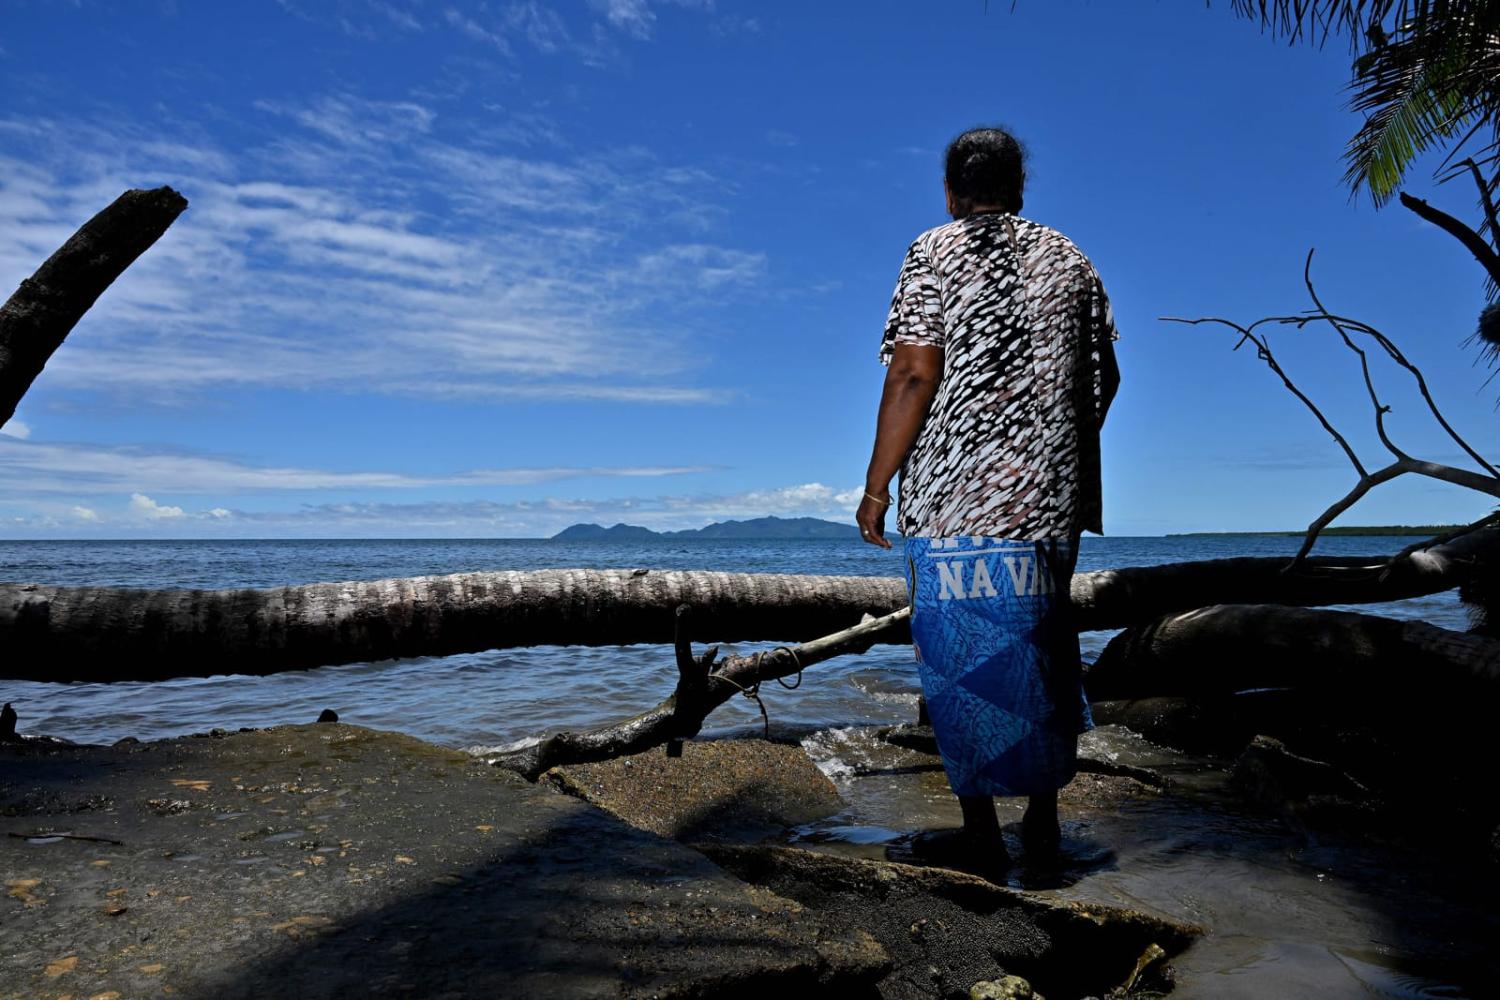 Lavenia McGoon, resident at Togoru, about 35 kilometres from the Fijian capital Suva, inspects coastal erosion near her beachfront house in December (Saeed Khan/AFP via Getty Images)